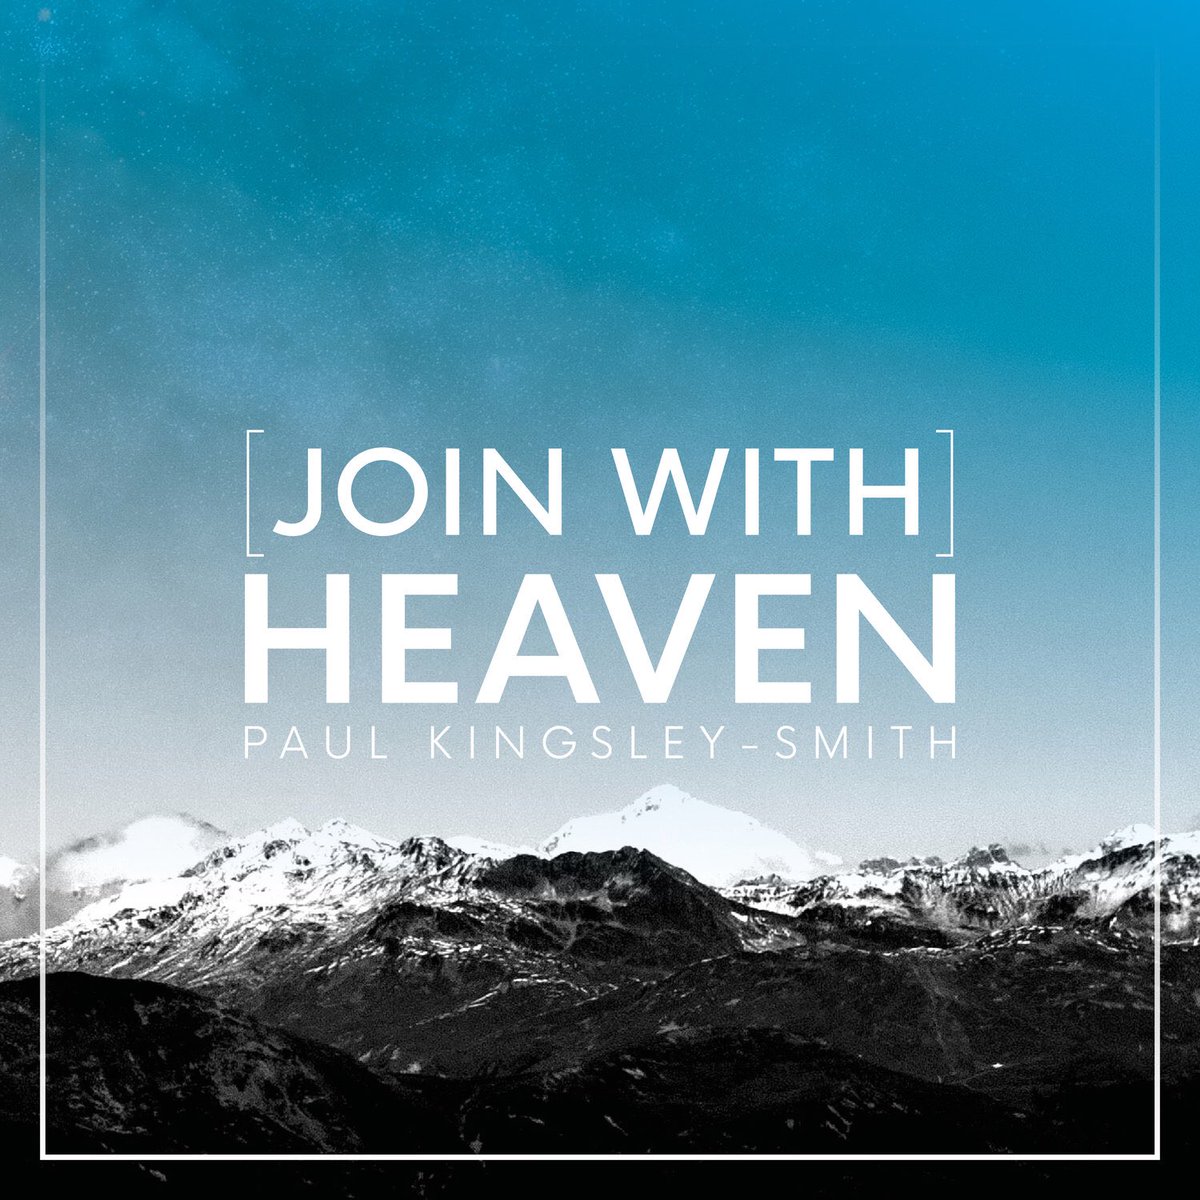 Paul Kingsley-Smith - [Join With] Heaven